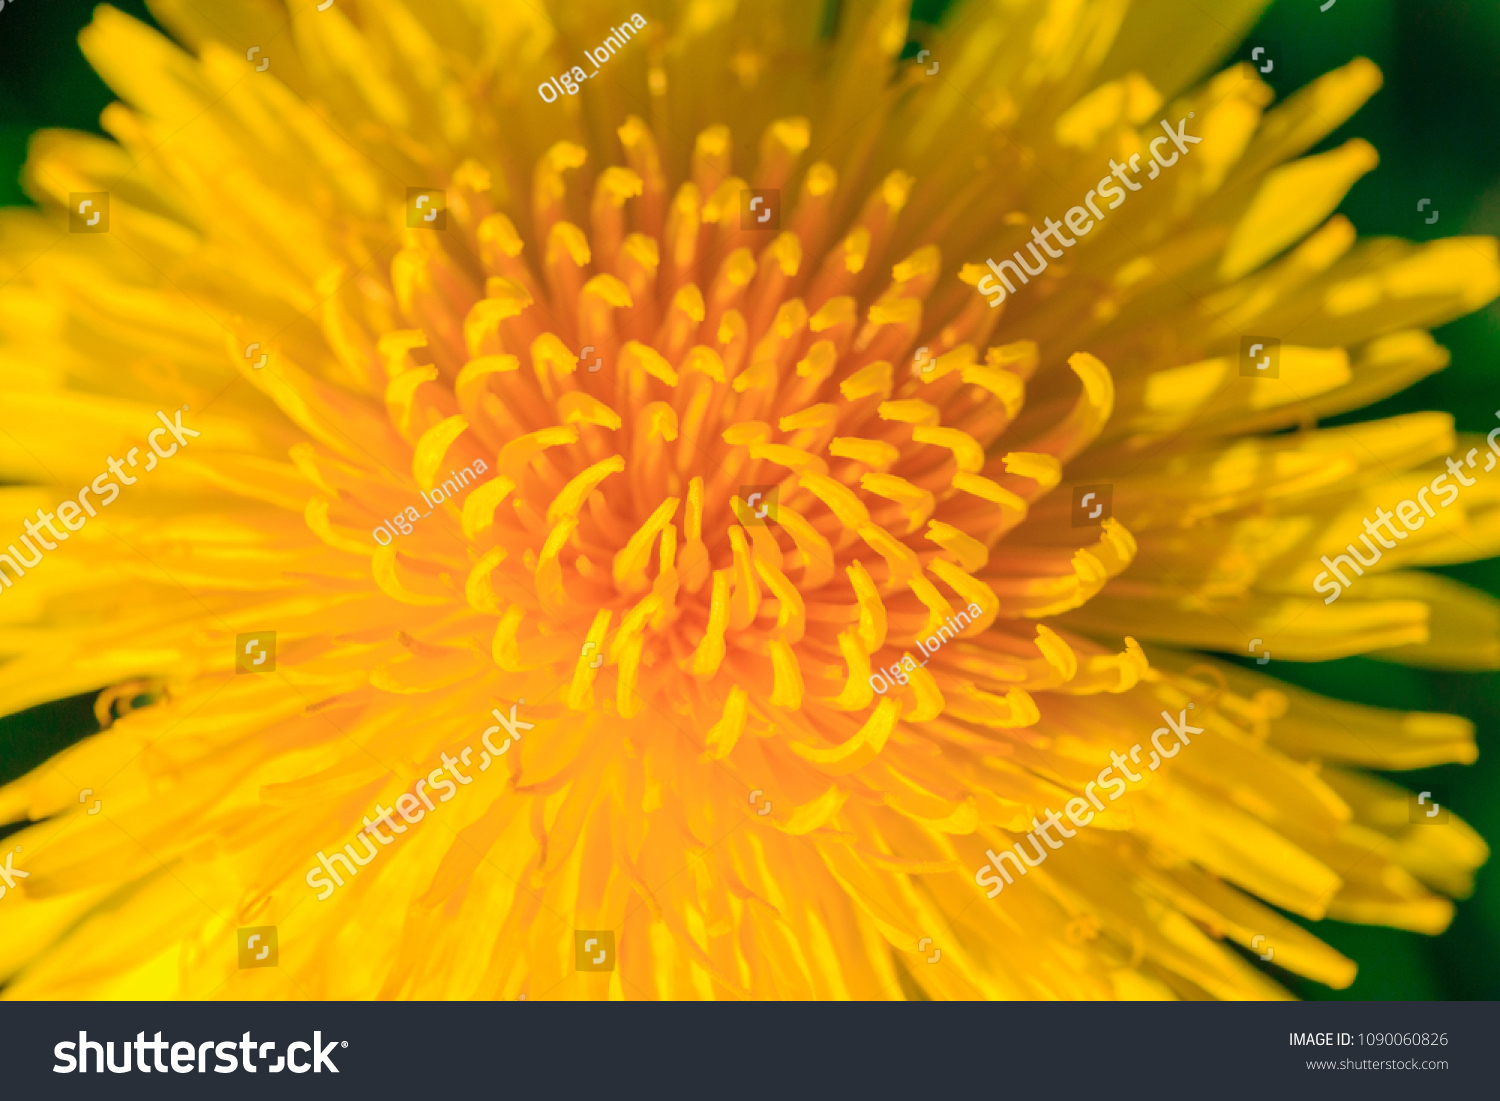 Yellow dandelion close up, macro, floral summer background #1090060826